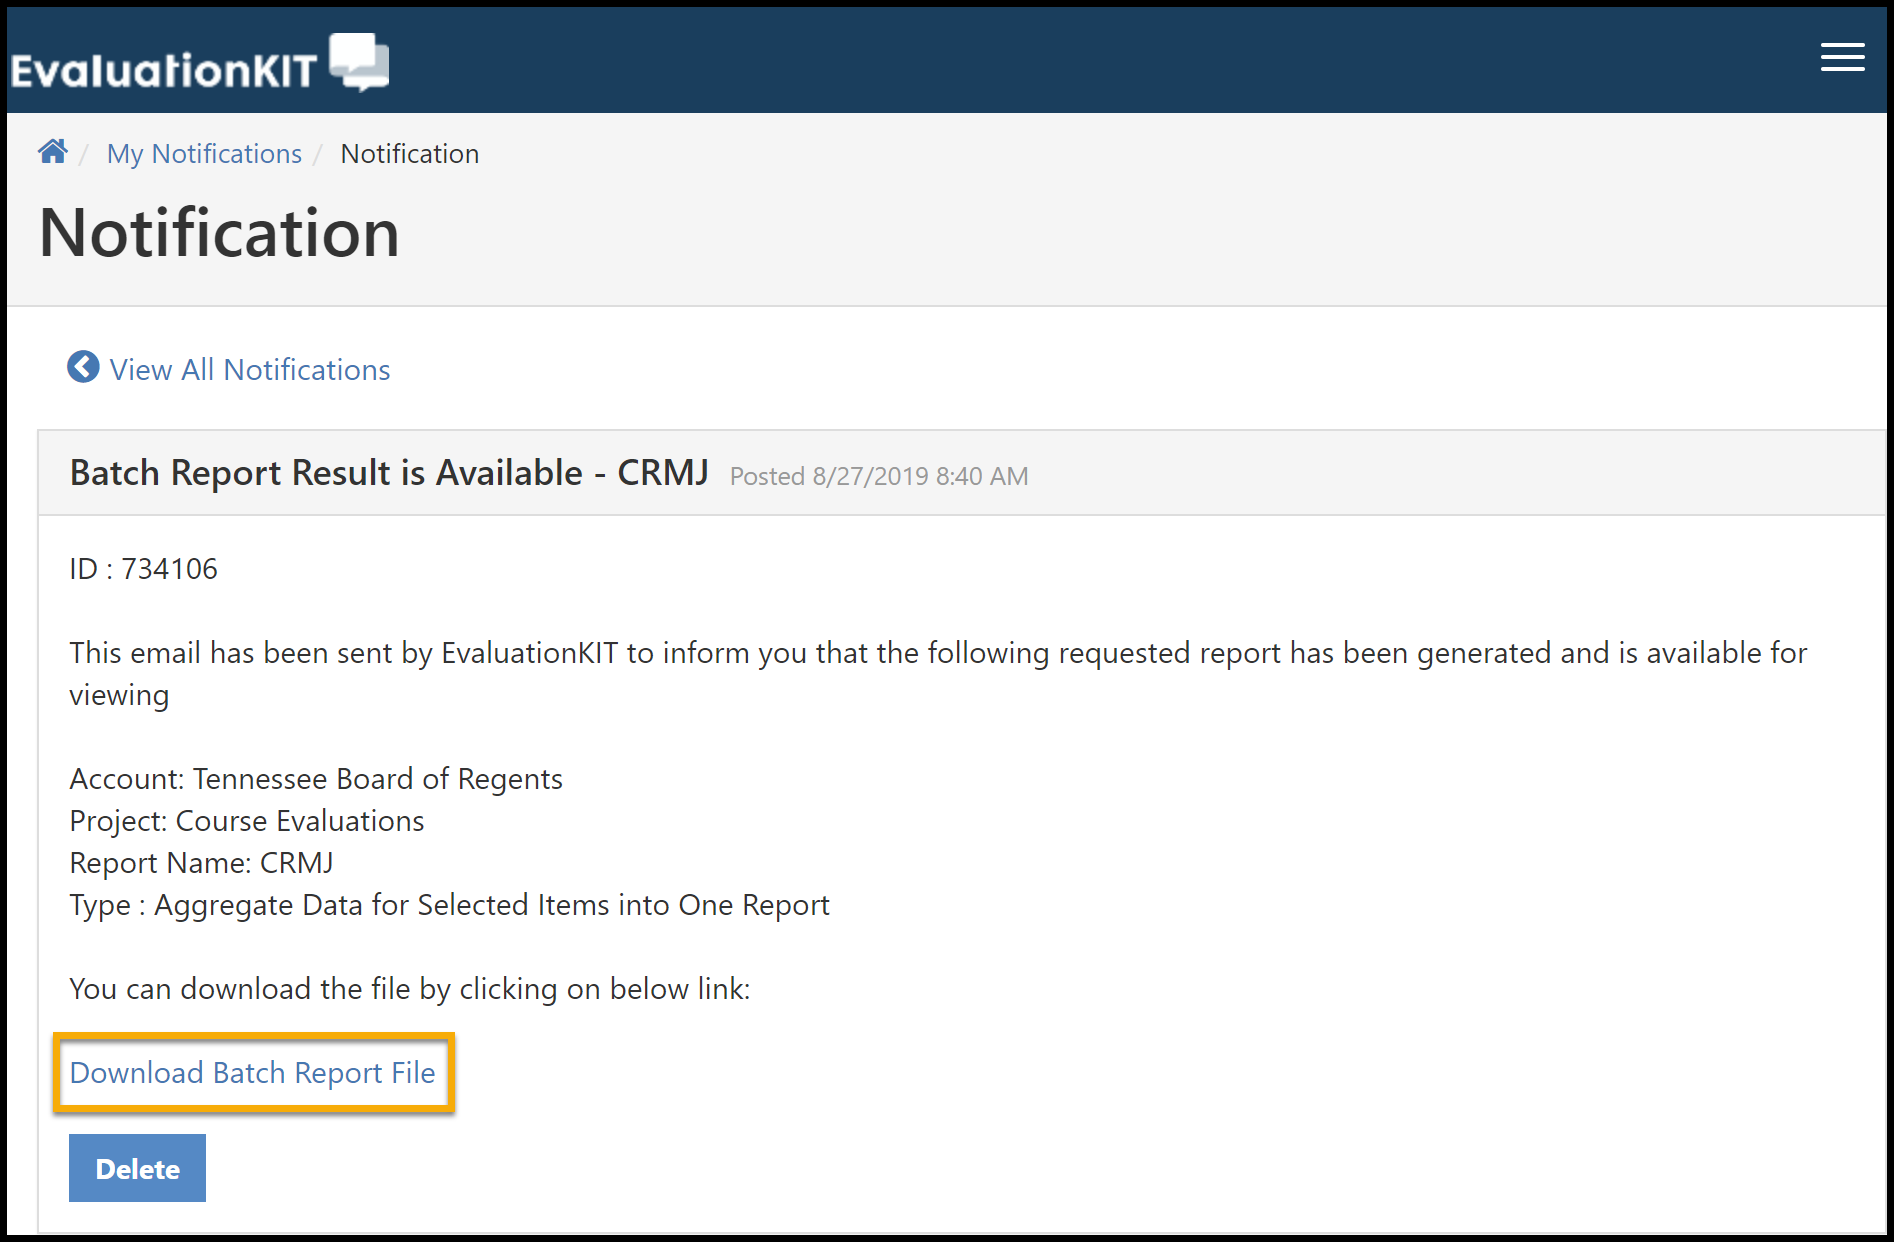 Notification window reporting report name, ID number, and Download Batch Report File link.